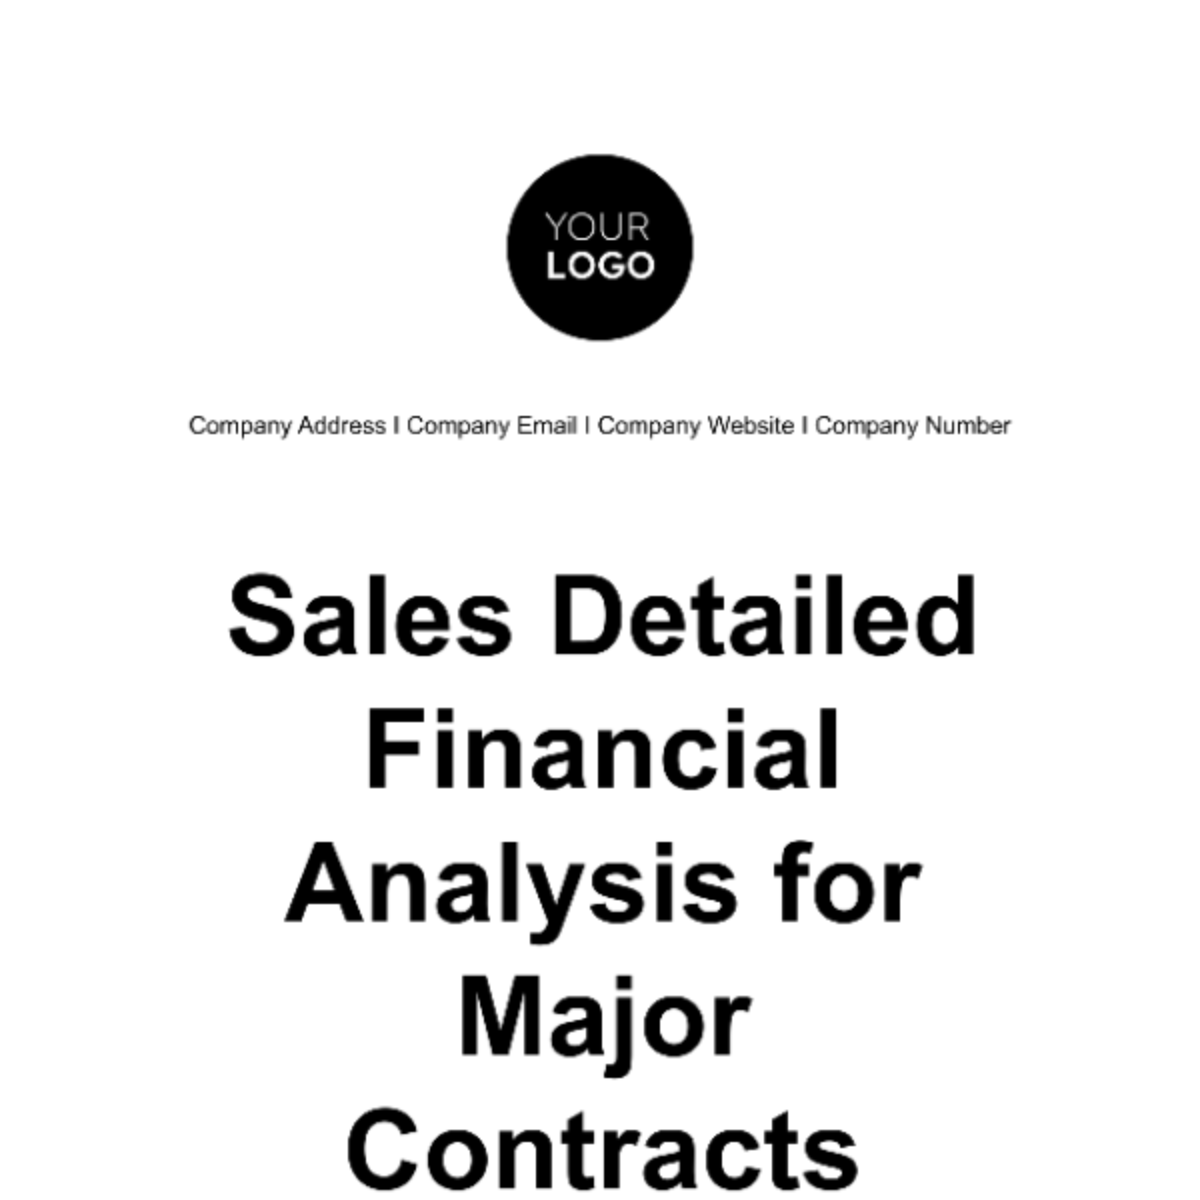 Sales Detailed Financial Analysis for Major Contracts Template